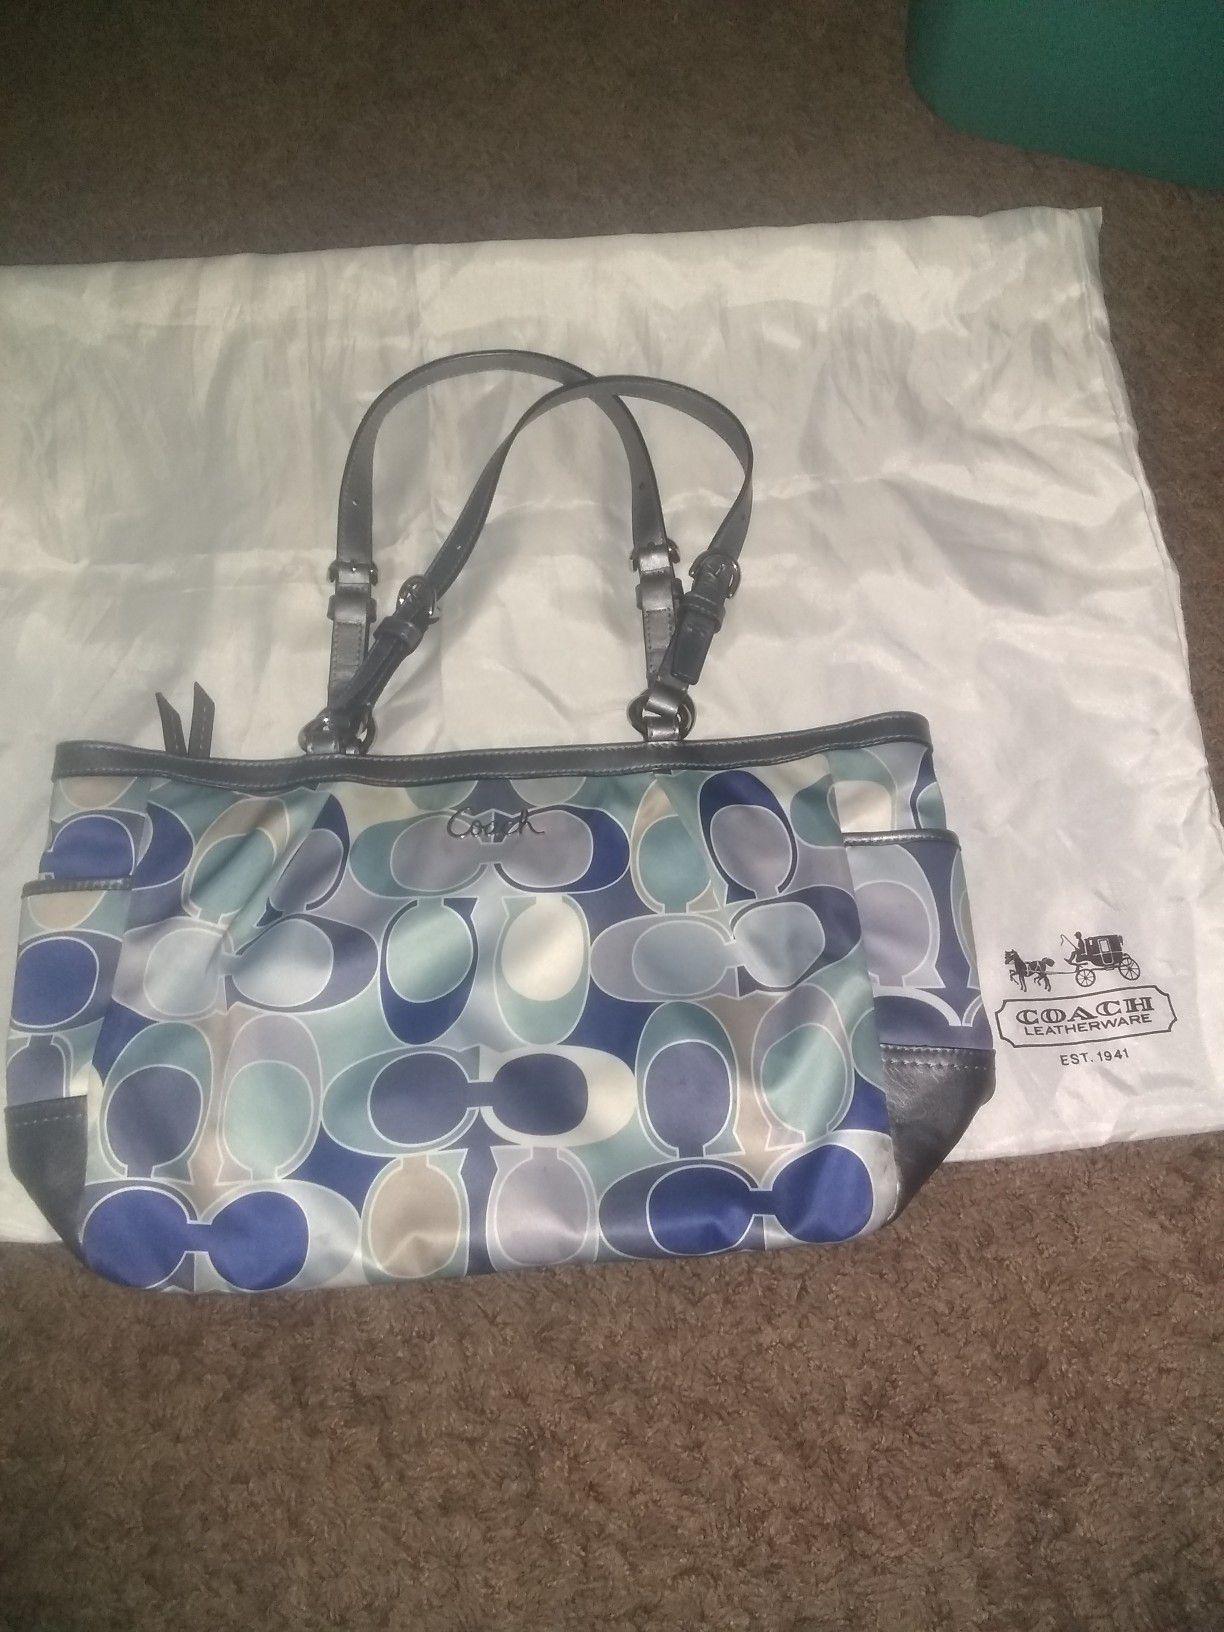 Authentic coach bag $20 FIRM (Flakes Blocked)